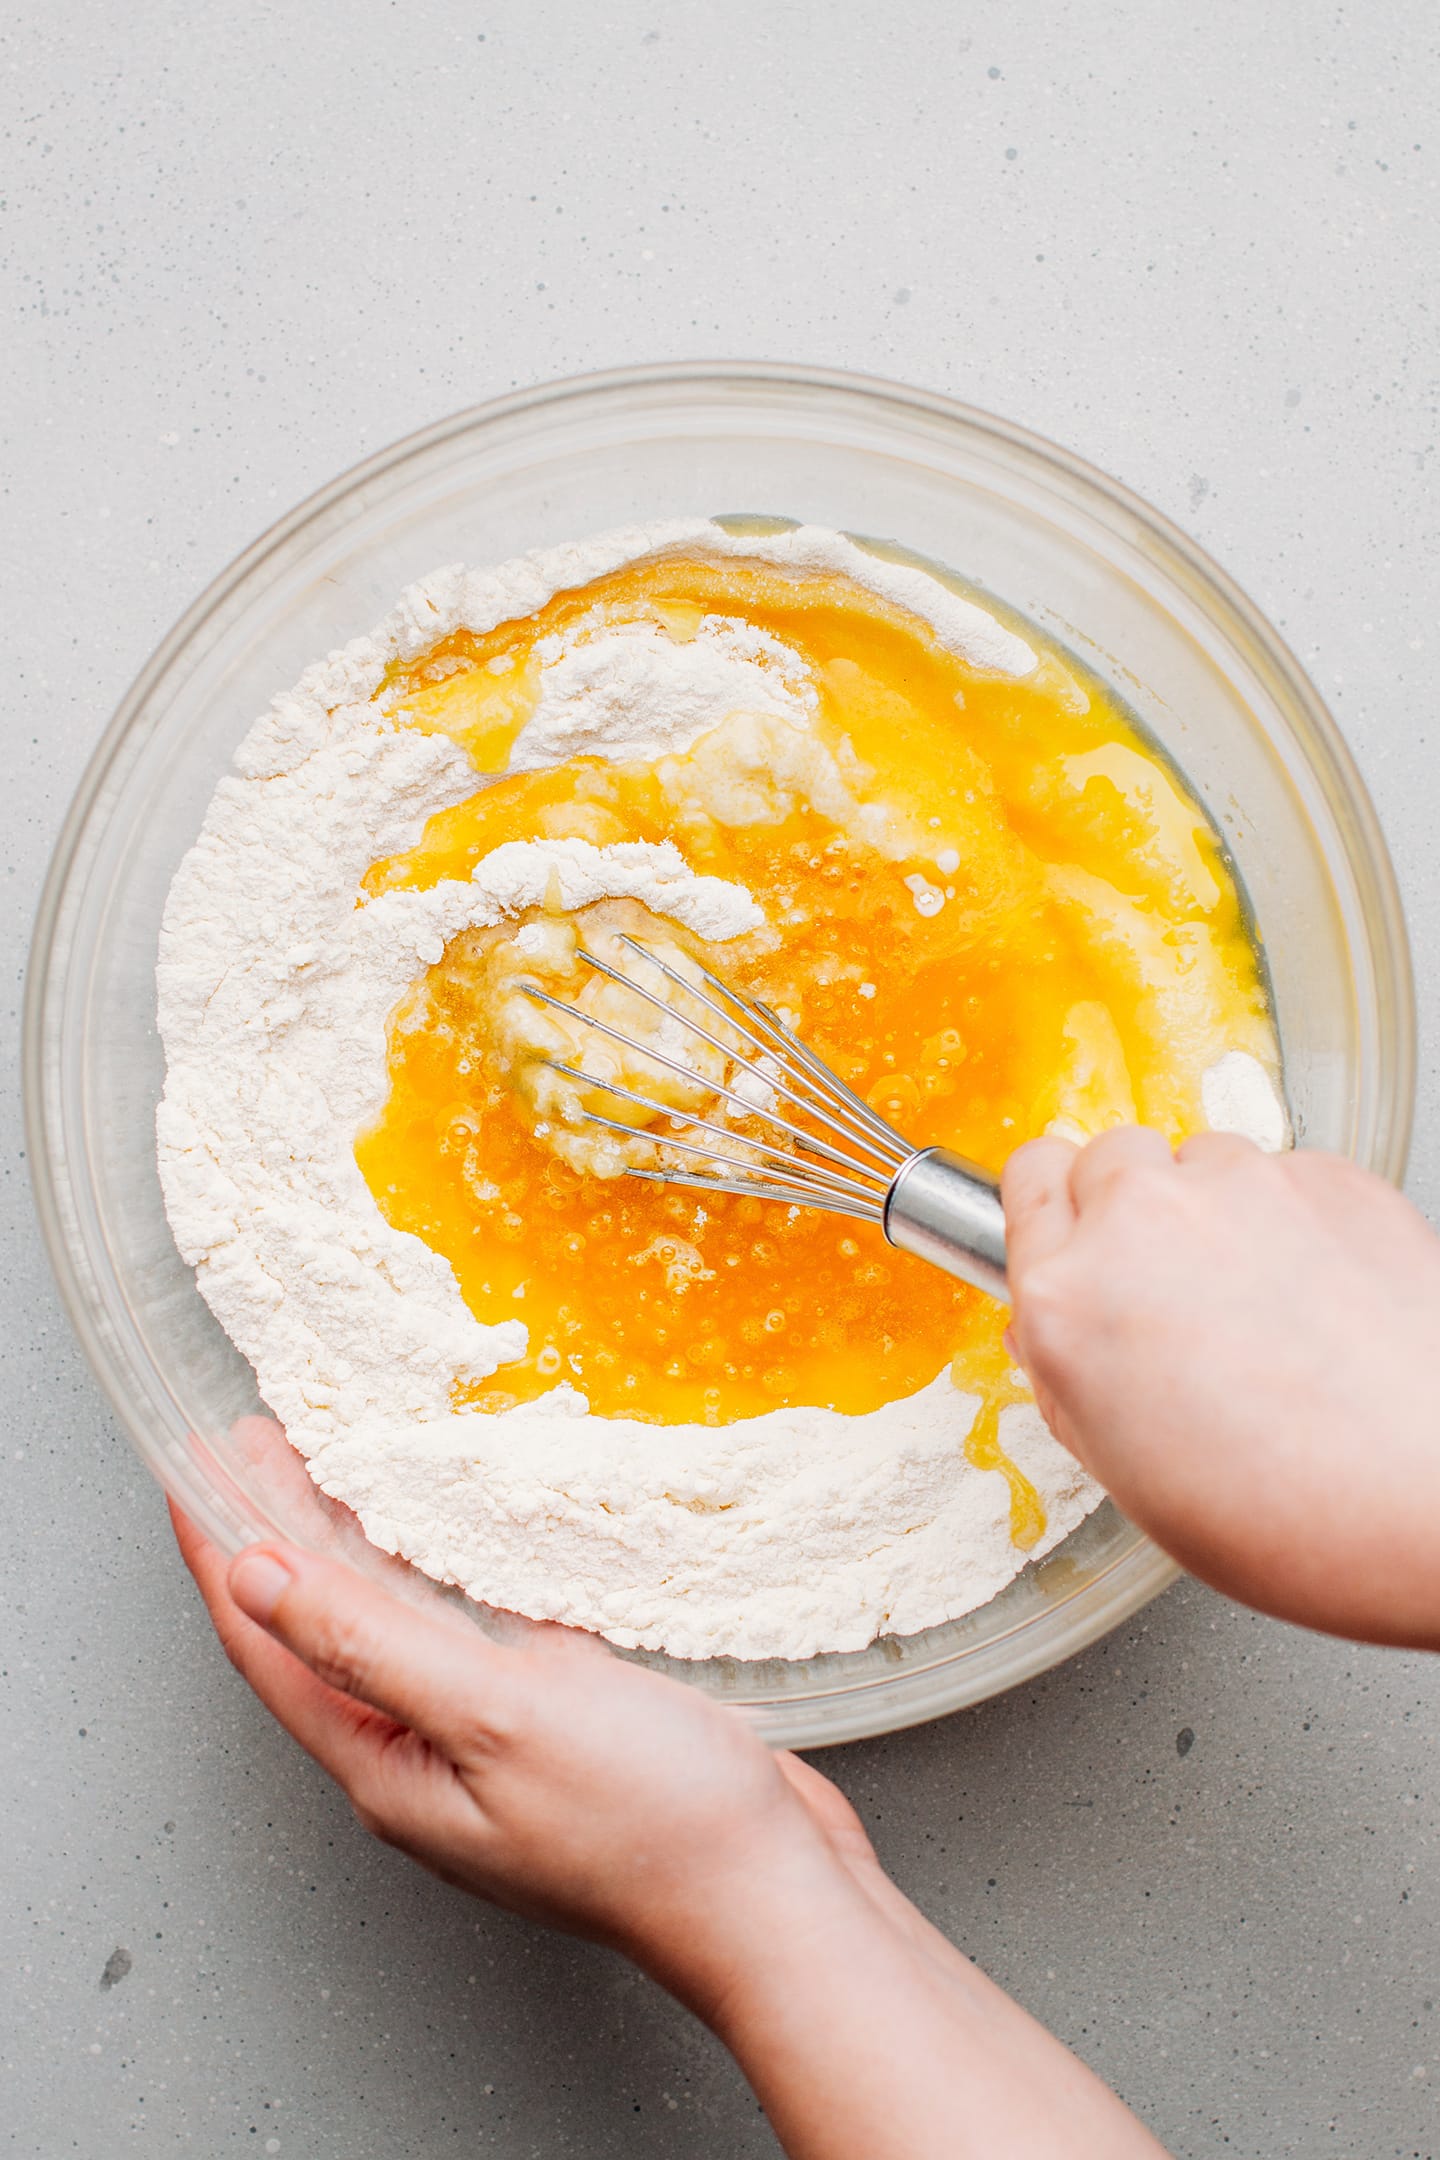 Whisking melted butter with flour and yogurt in a mixing bowl.